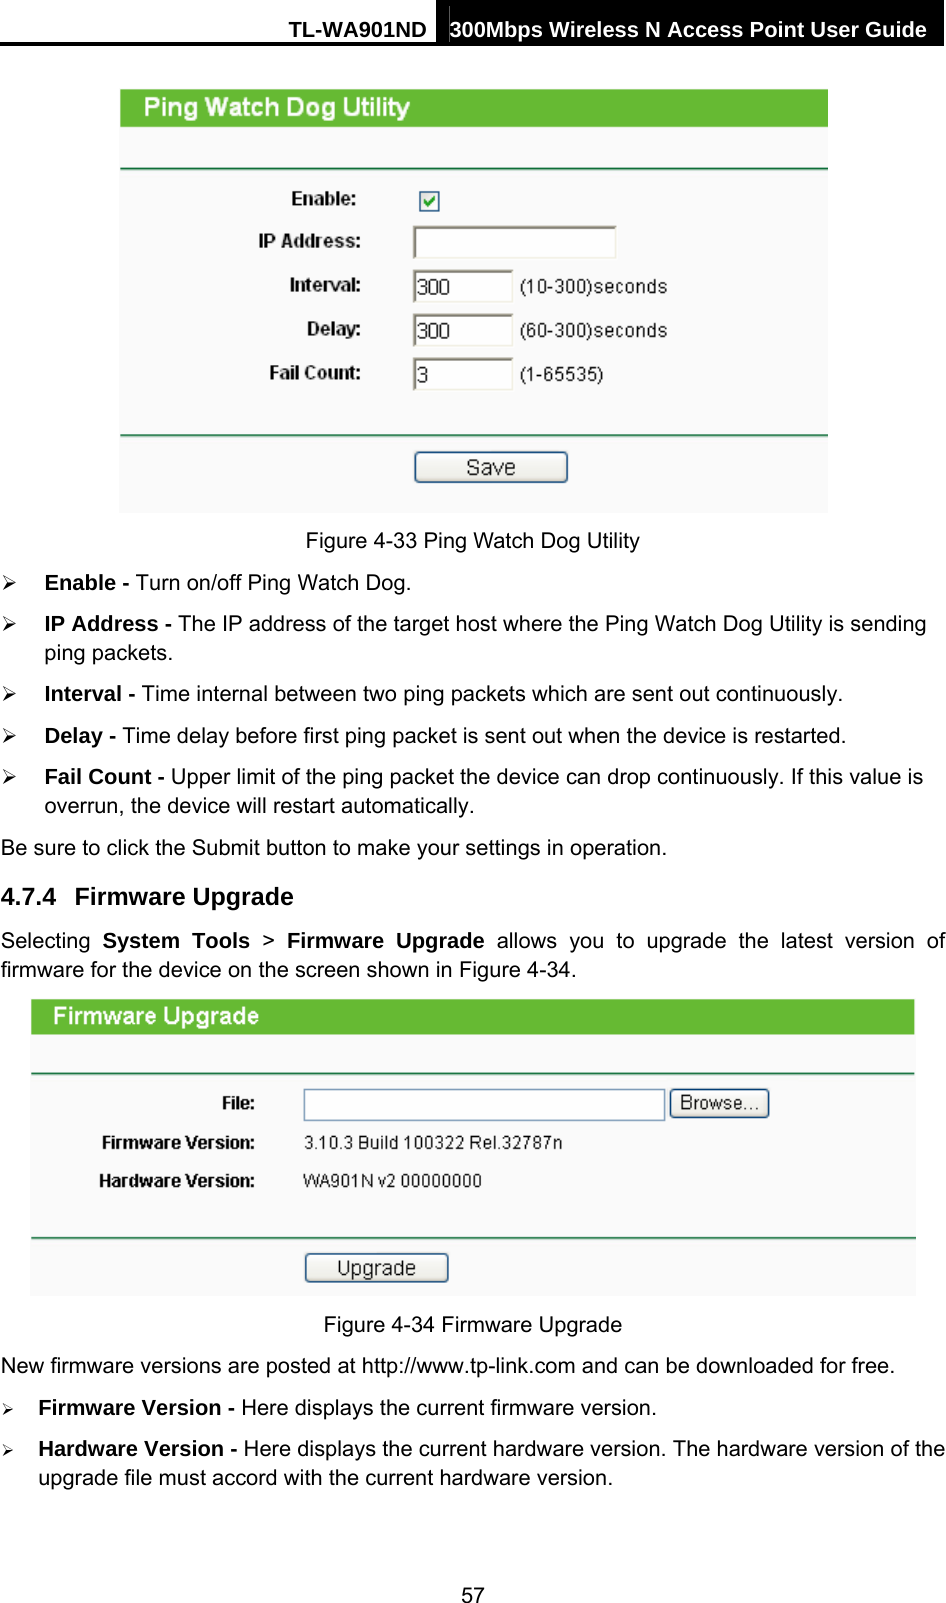 TL-WA901ND 300Mbps Wireless N Access Point User Guide  Figure 4-33 Ping Watch Dog Utility ¾ Enable - Turn on/off Ping Watch Dog. ¾ IP Address - The IP address of the target host where the Ping Watch Dog Utility is sending ping packets. ¾ Interval - Time internal between two ping packets which are sent out continuously. ¾ Delay - Time delay before first ping packet is sent out when the device is restarted. ¾ Fail Count - Upper limit of the ping packet the device can drop continuously. If this value is overrun, the device will restart automatically. Be sure to click the Submit button to make your settings in operation. 4.7.4  Firmware Upgrade Selecting  System Tools &gt; Firmware Upgrade allows you to upgrade the latest version of firmware for the device on the screen shown in Figure 4-34.  Figure 4-34 Firmware Upgrade New firmware versions are posted at http://www.tp-link.com and can be downloaded for free.   ¾ Firmware Version - Here displays the current firmware version. ¾ Hardware Version - Here displays the current hardware version. The hardware version of the upgrade file must accord with the current hardware version. 57 